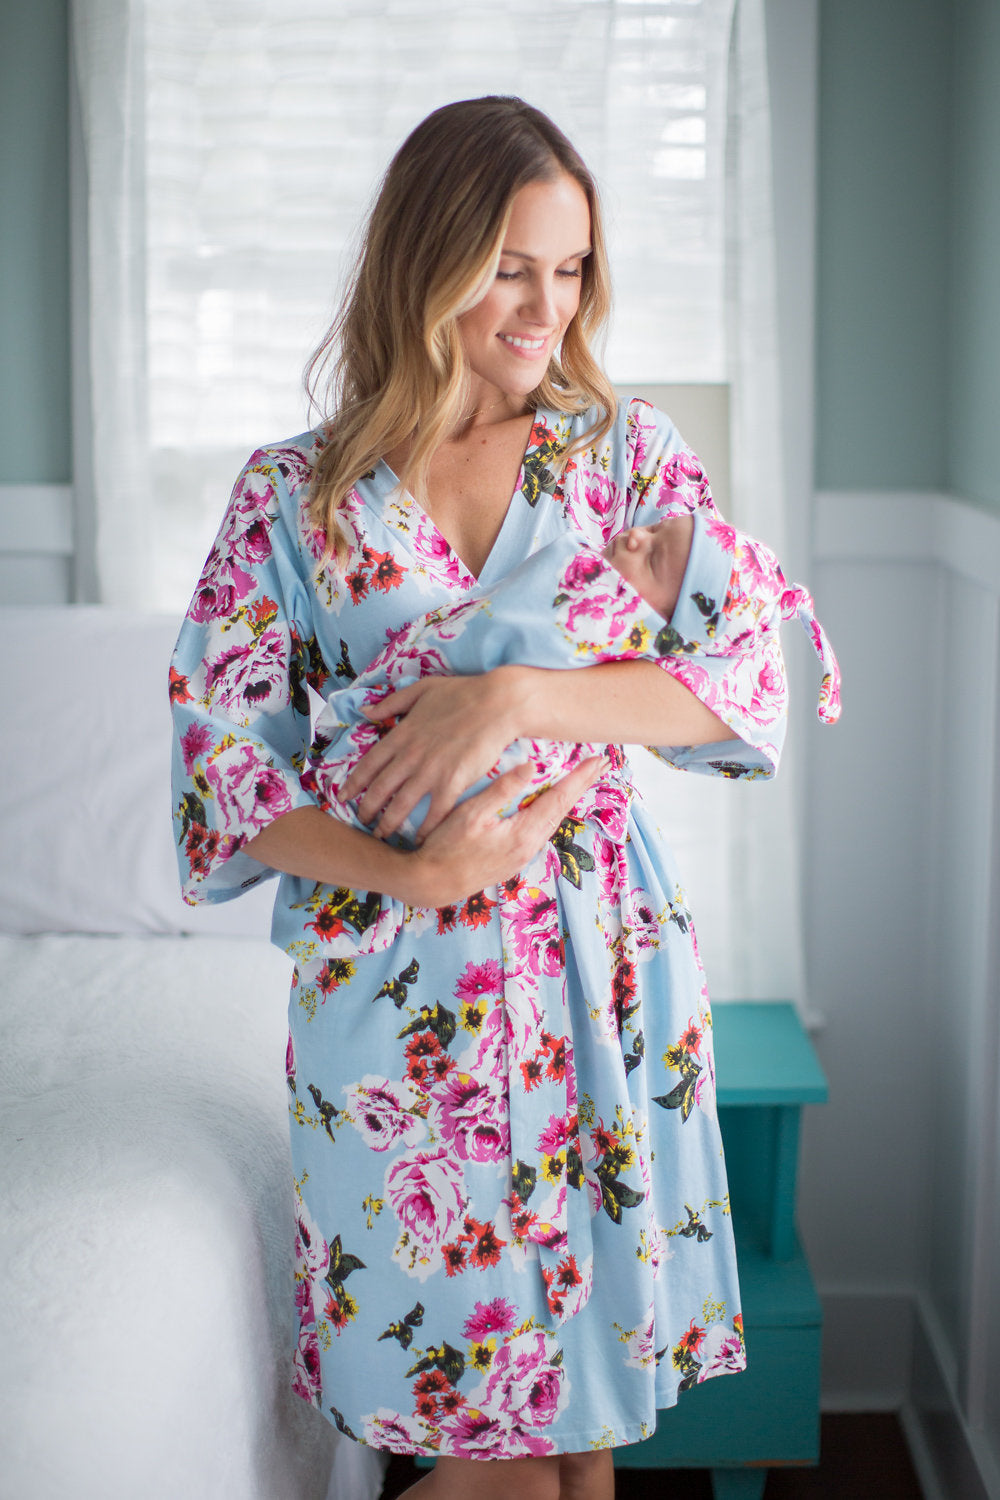 matching robes for mom and newborn